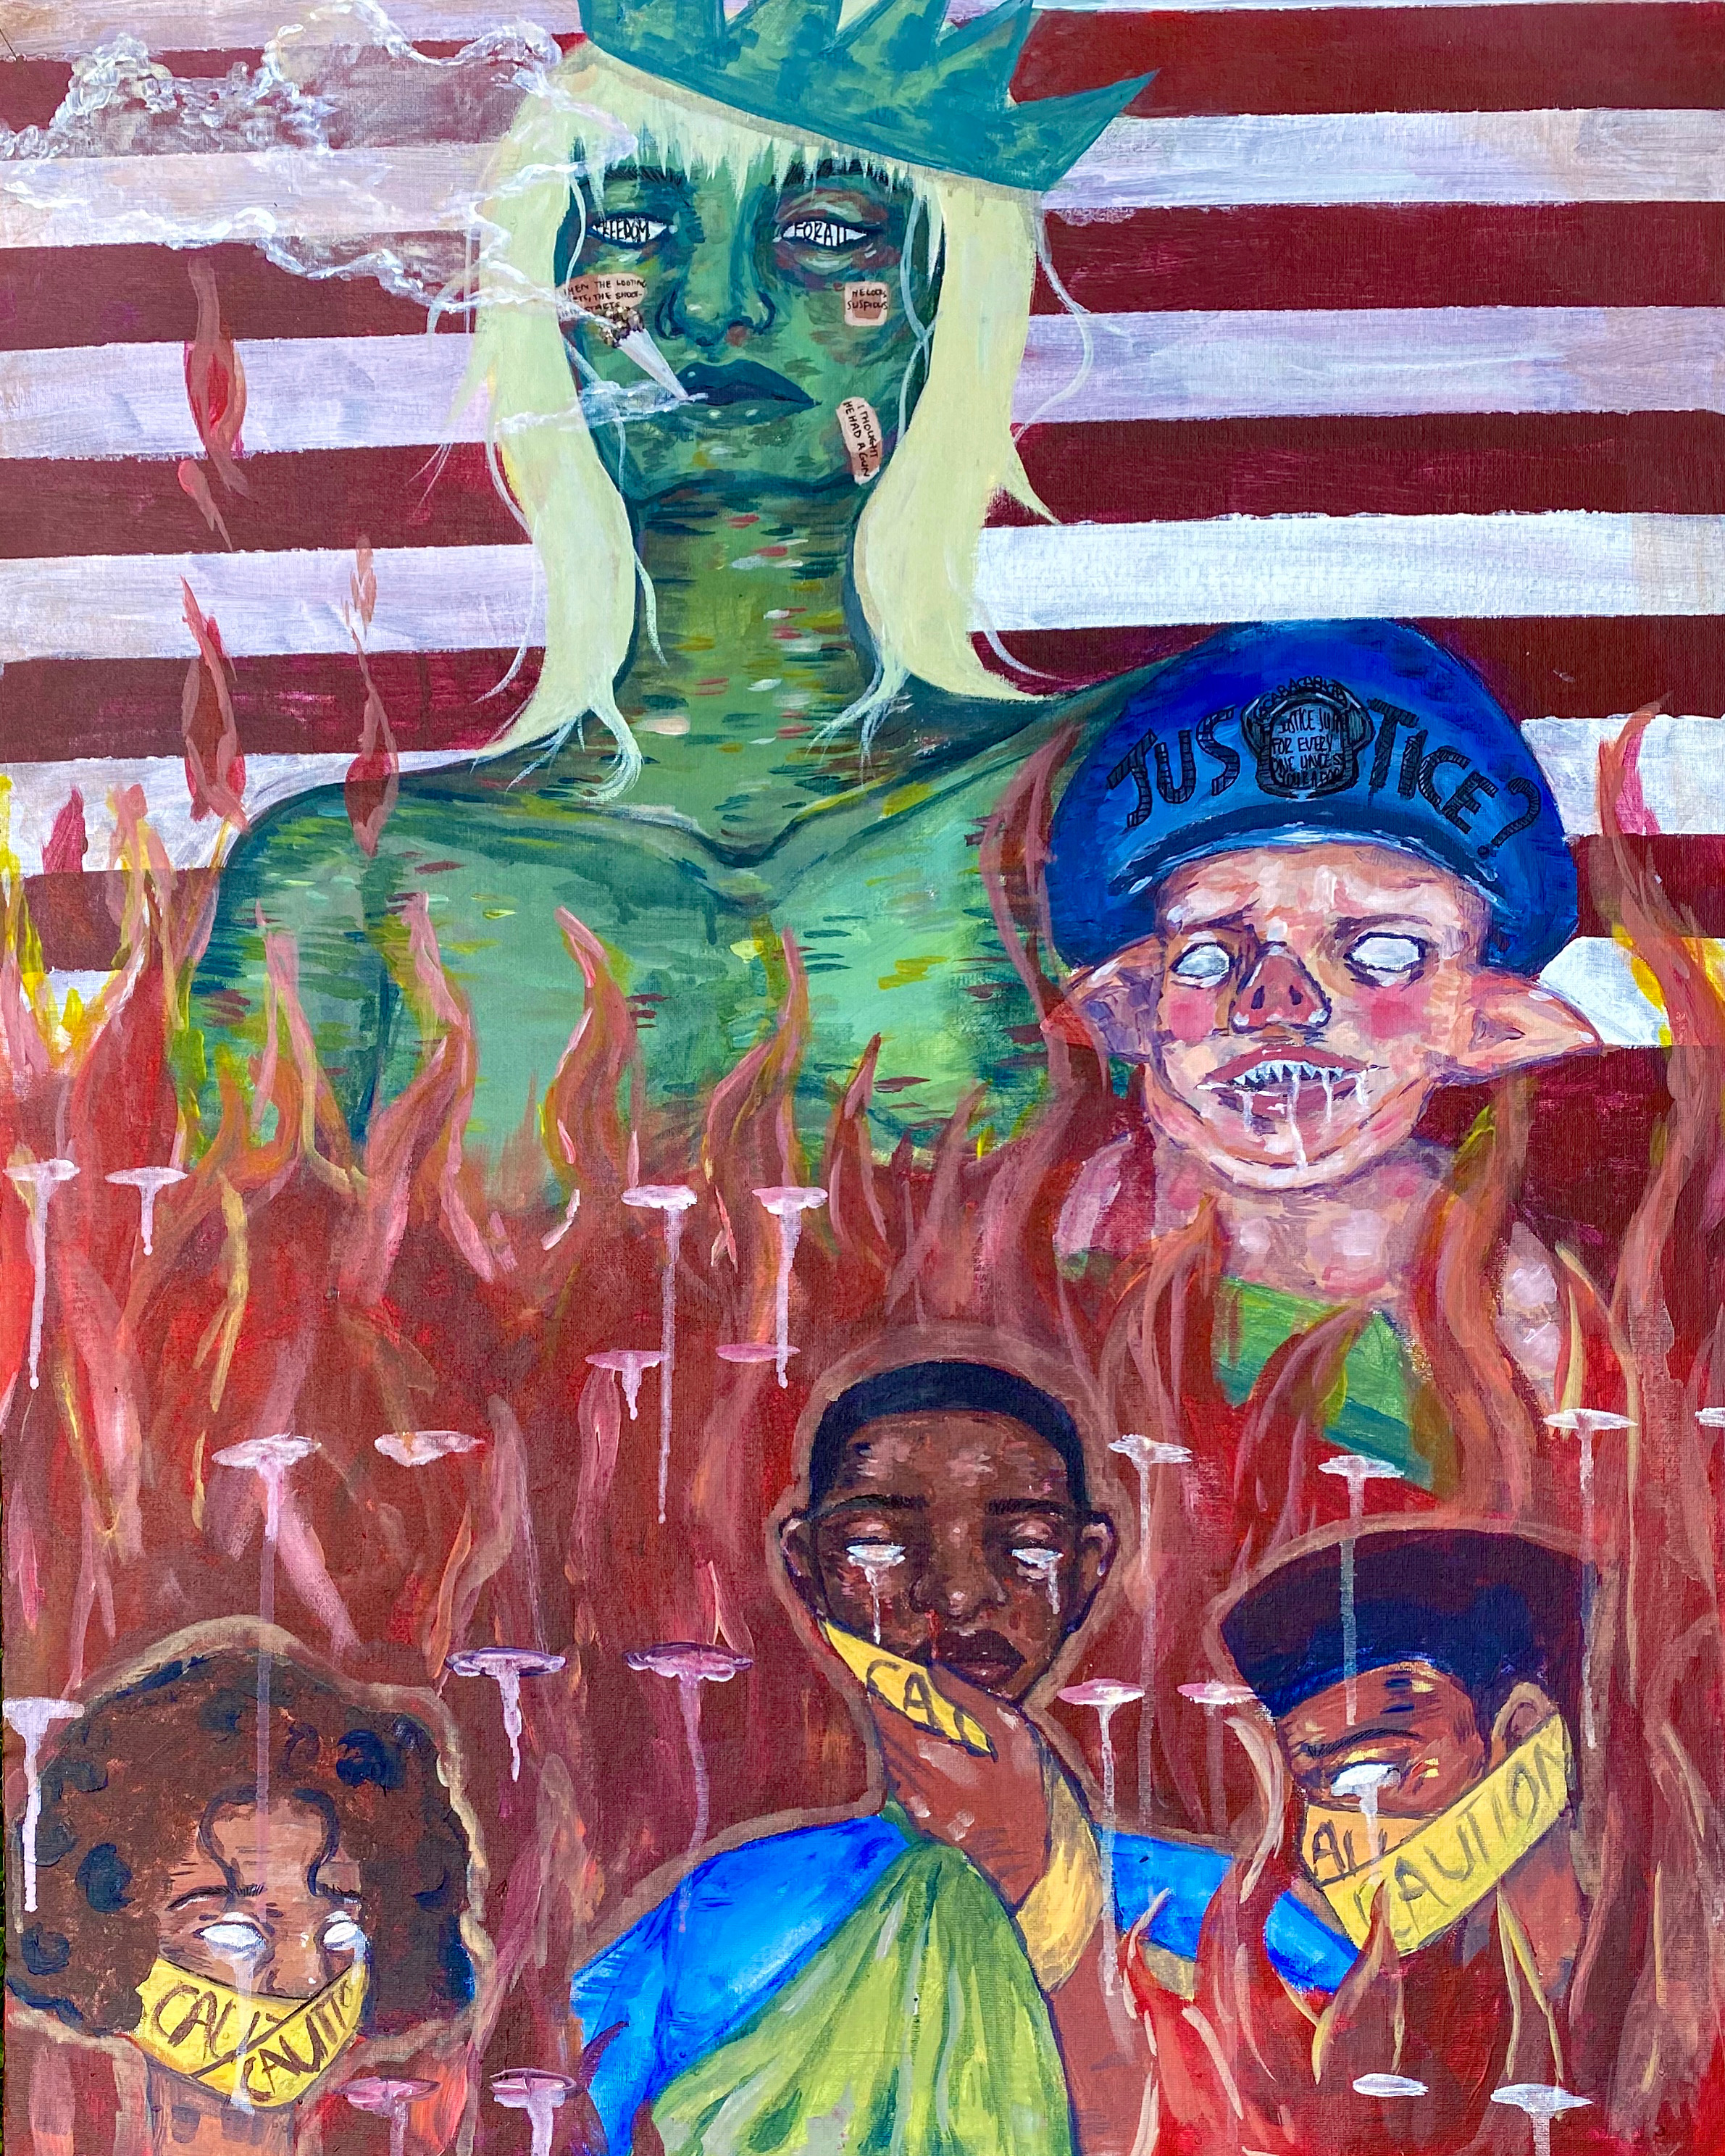 Acrylic on Canvas paint depicting three black people suffering, a cop painted to be a pig with the statue of liberty smoking.